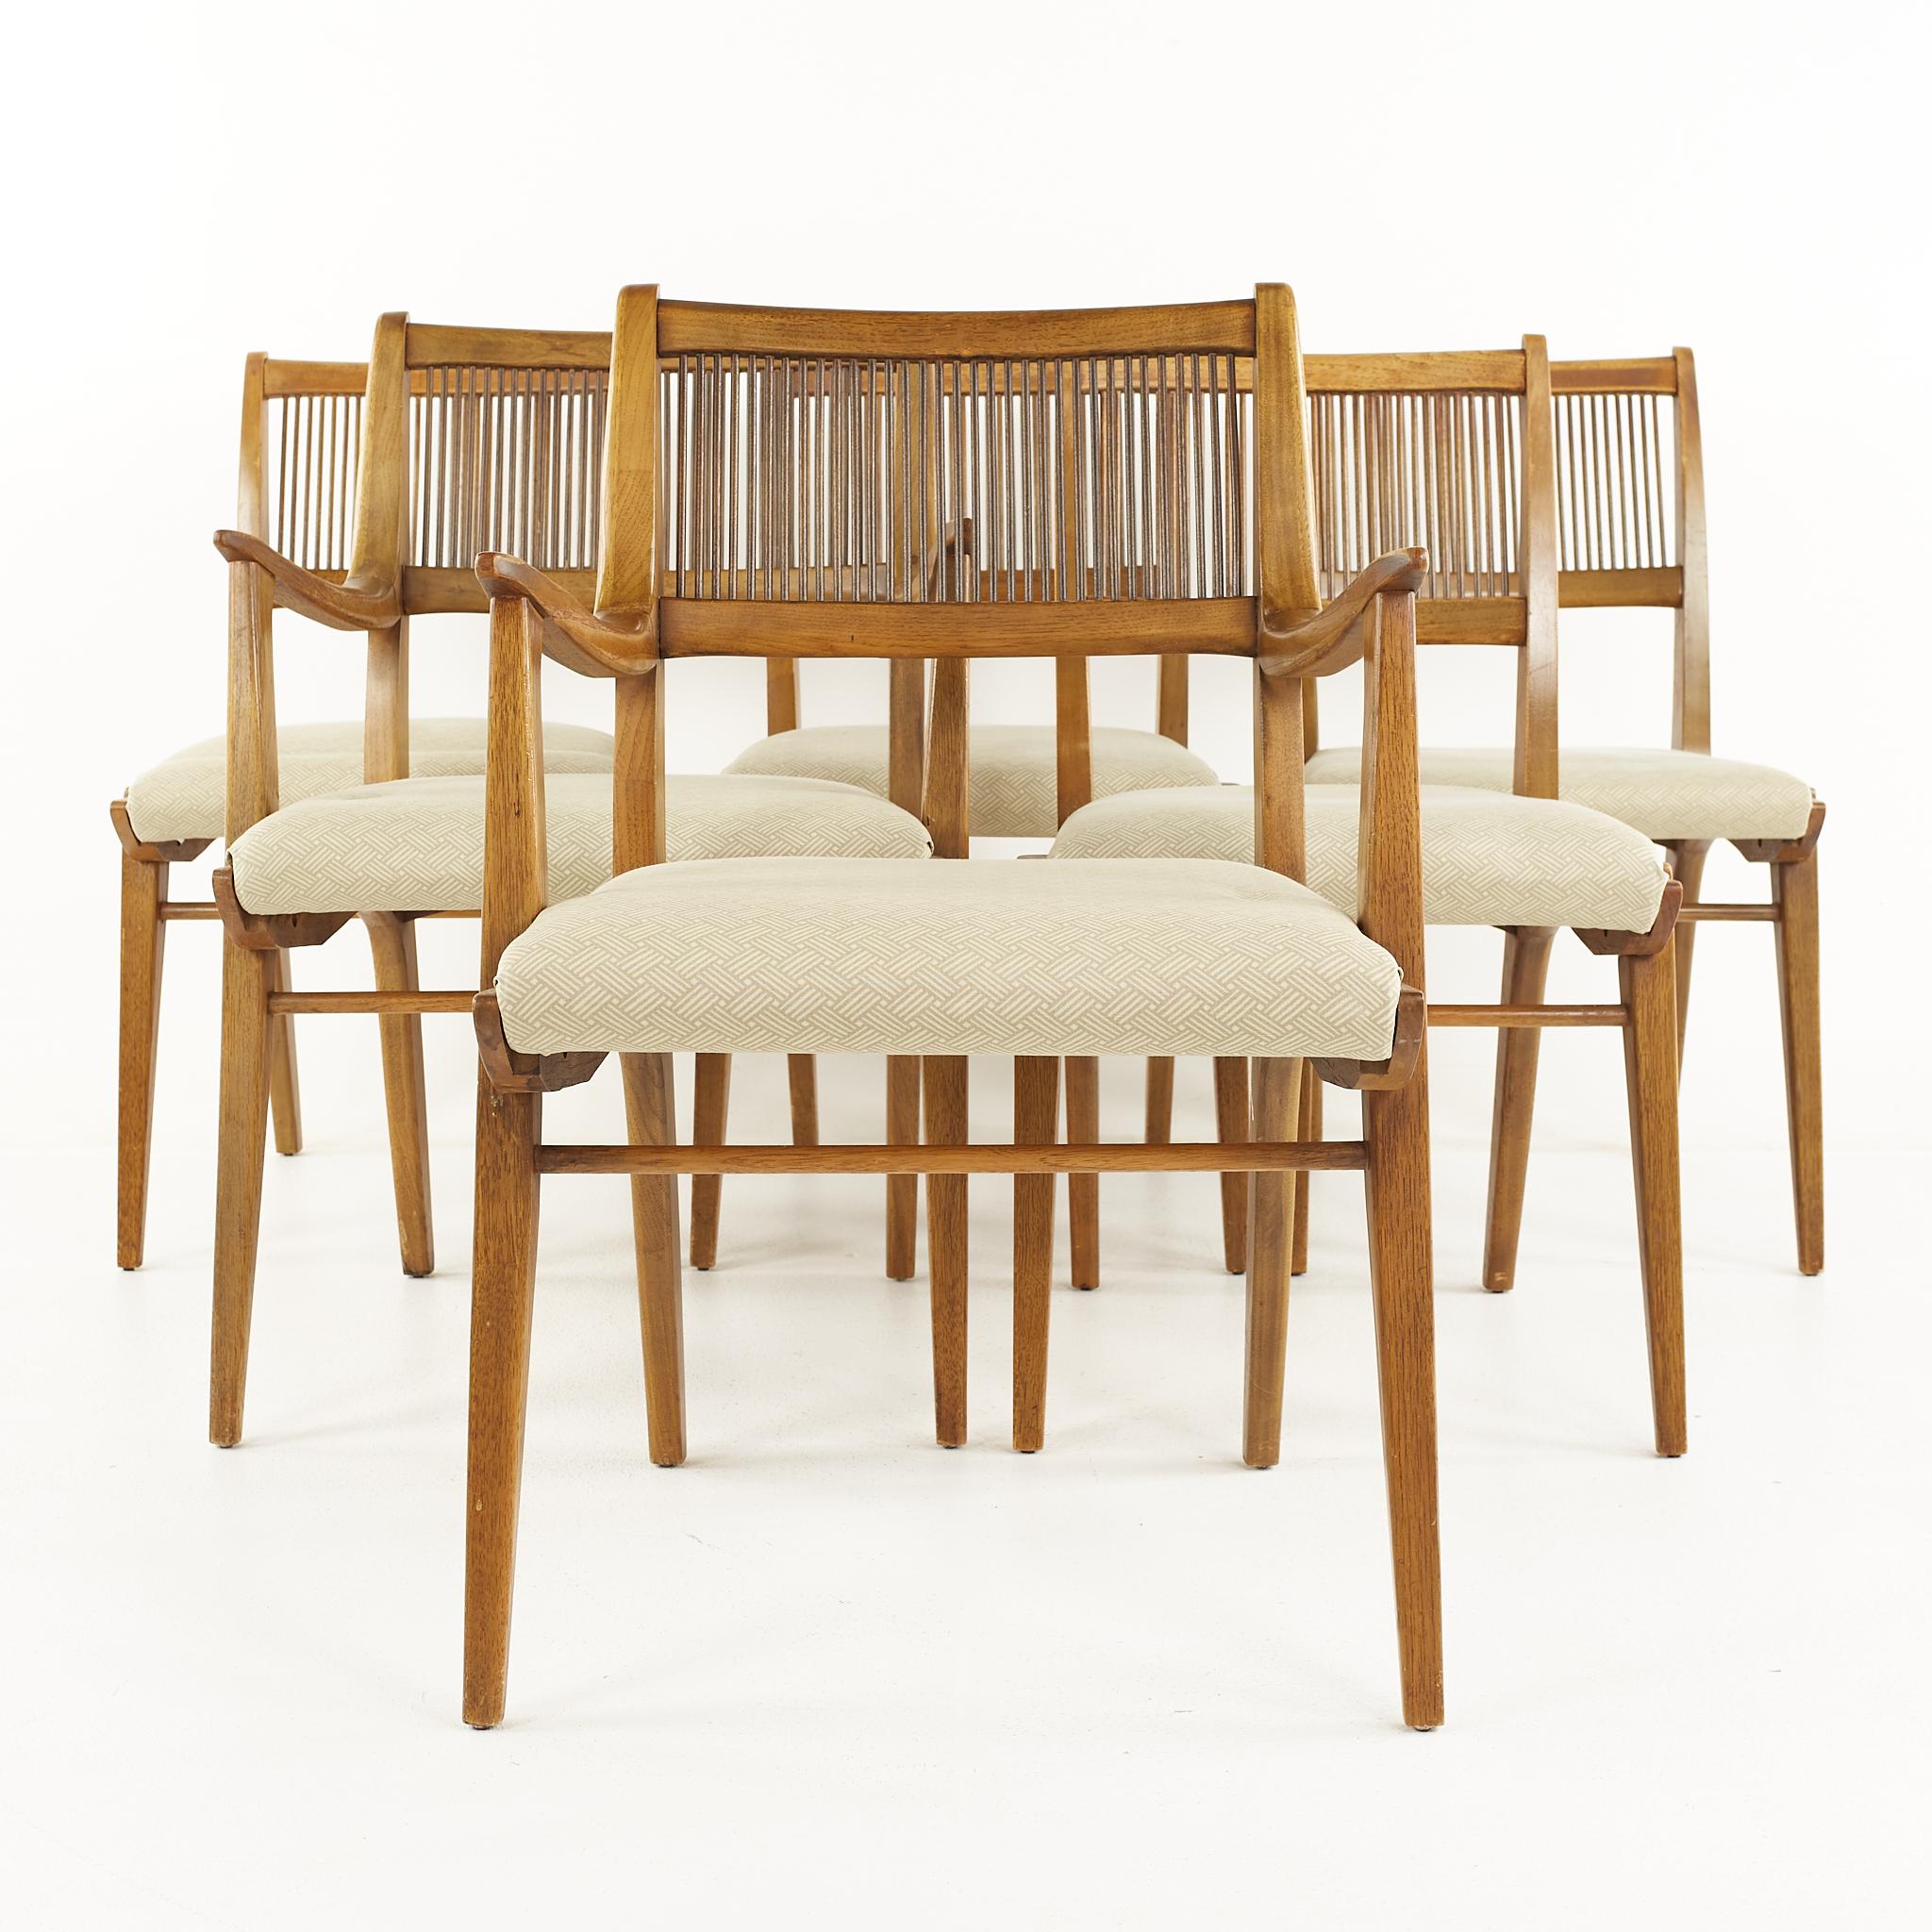 John Van Koert for Drexel Profile mid century dining chairs - set of 6

The side chairs measure: 20 wide x 24 deep x 34.25 inches high, with a seat height of 20 inches

The captains' chair measures: 23 wide x 24 deep x 35.25 inches high, with a